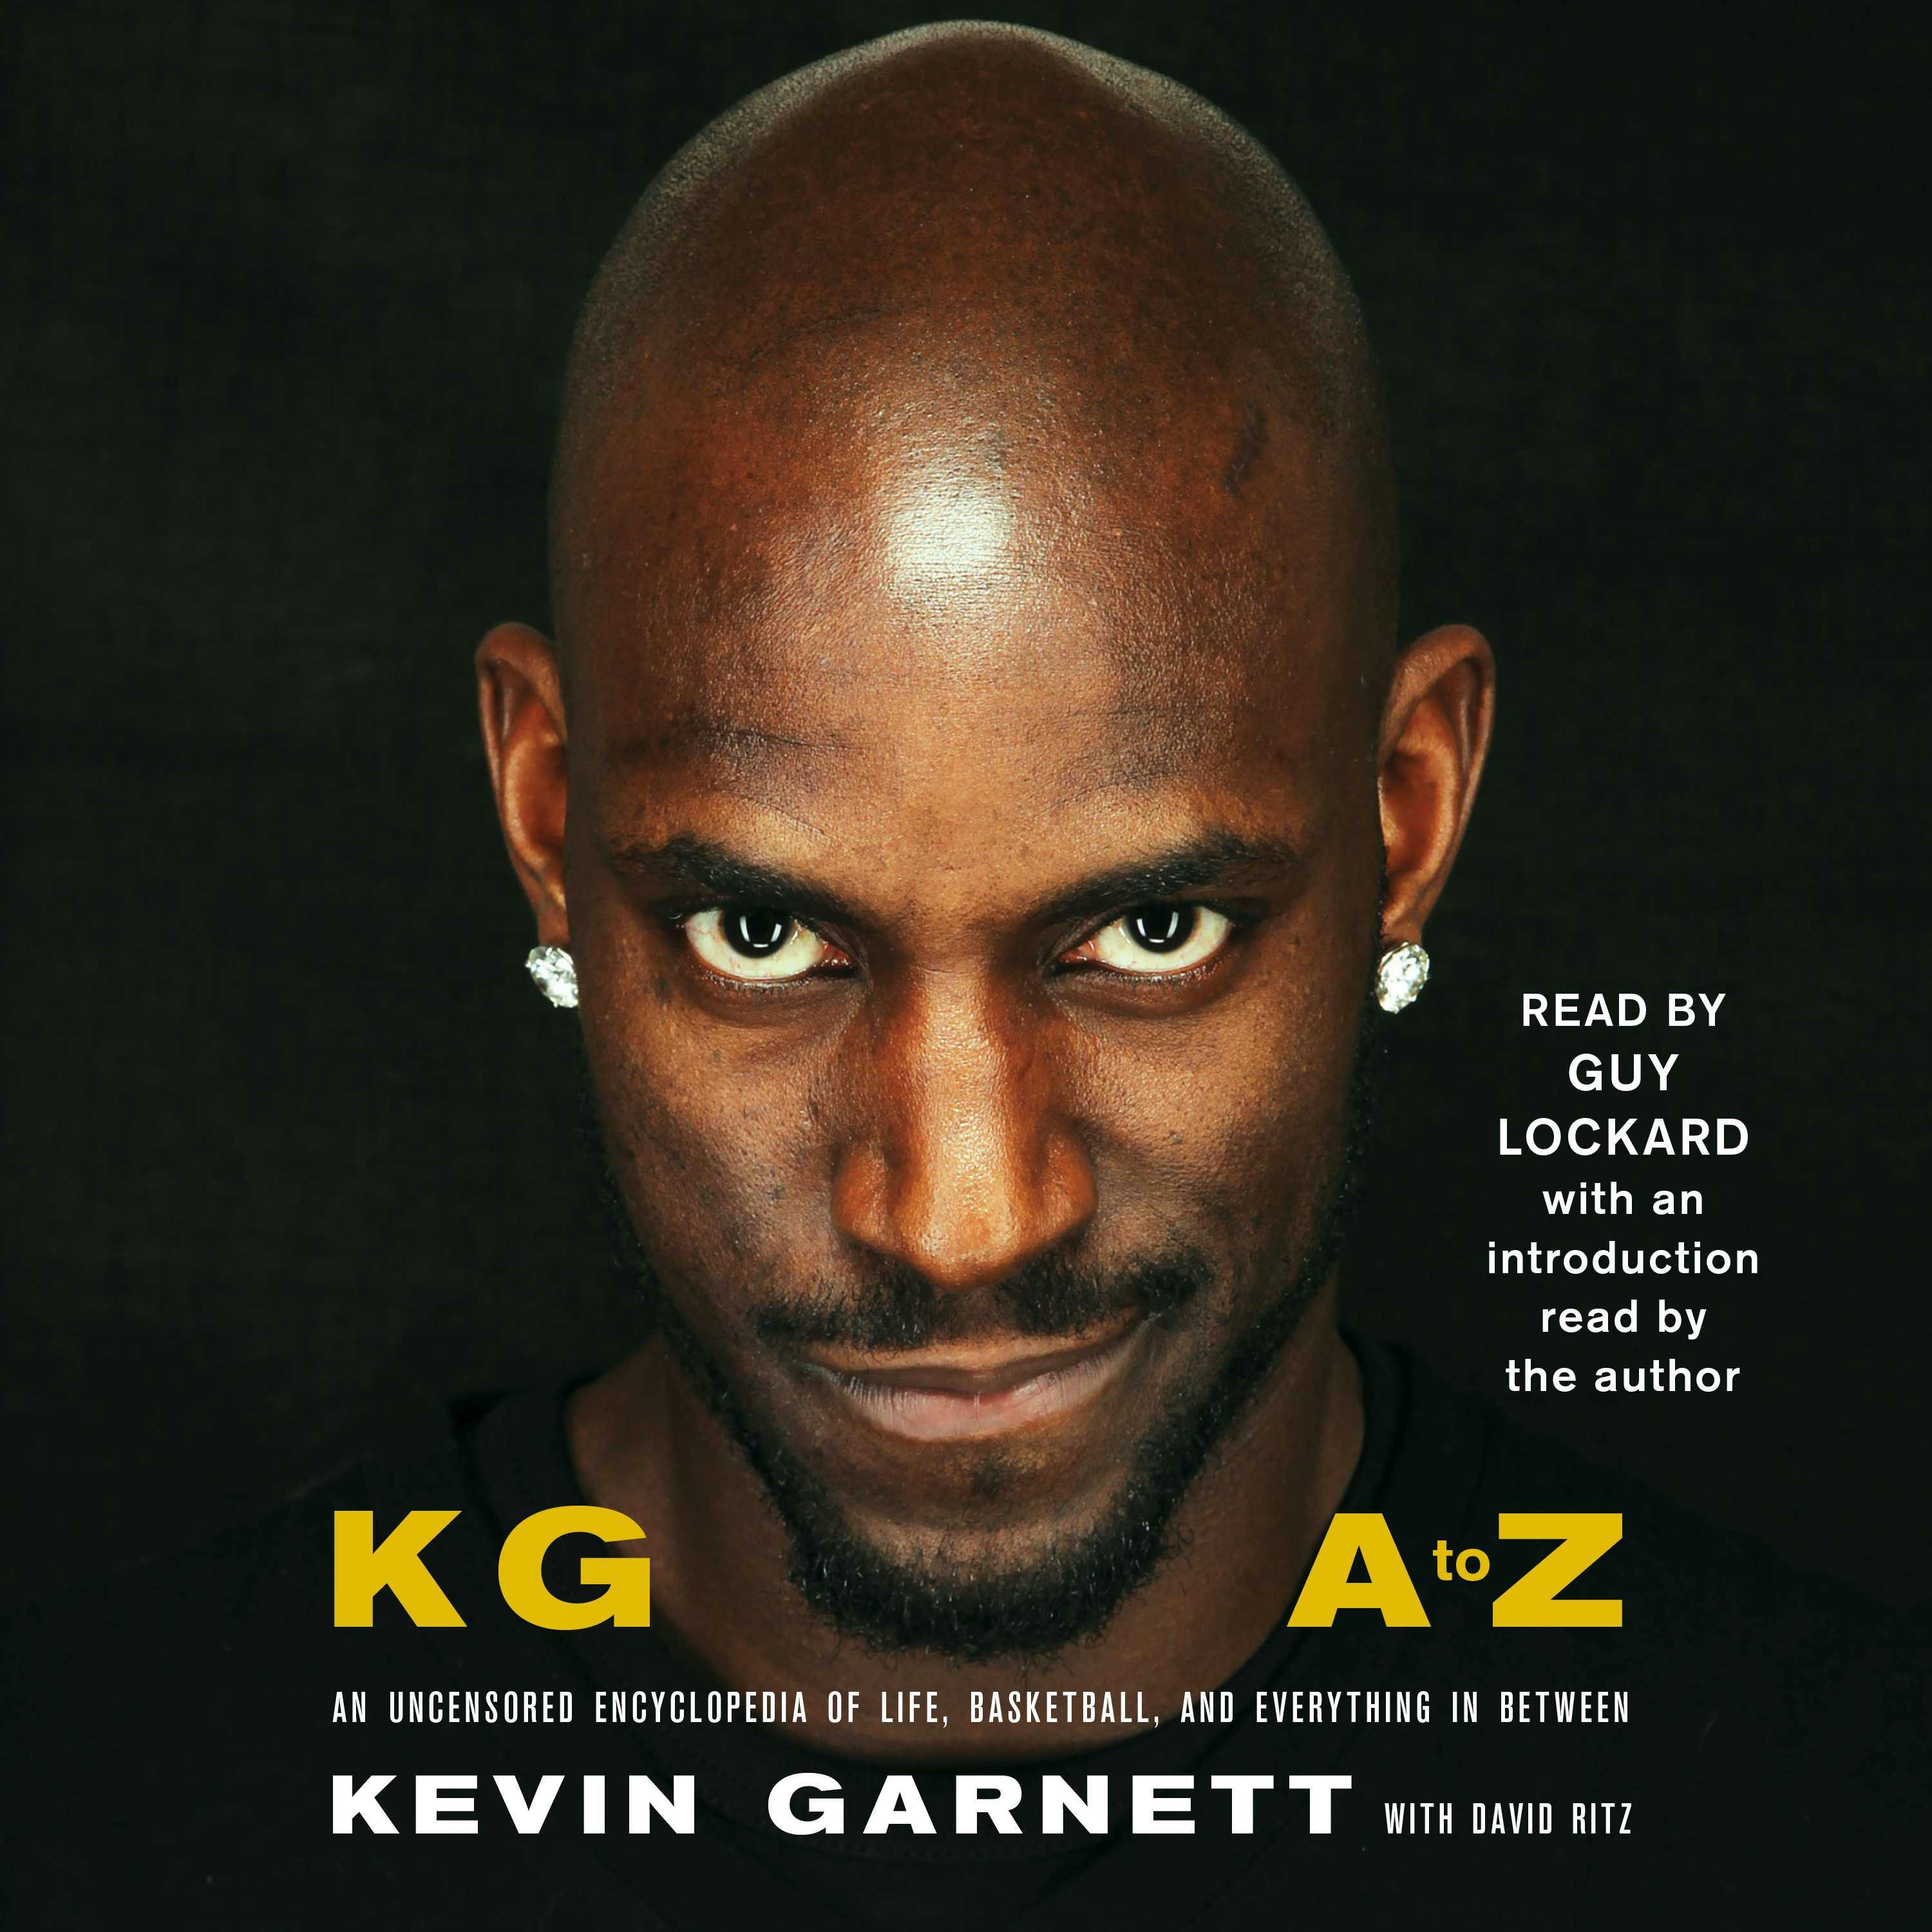 KG: A to Z: An Uncensored Encyclopedia of Life, Basketball, and Everything in Between - Kevin Garnett